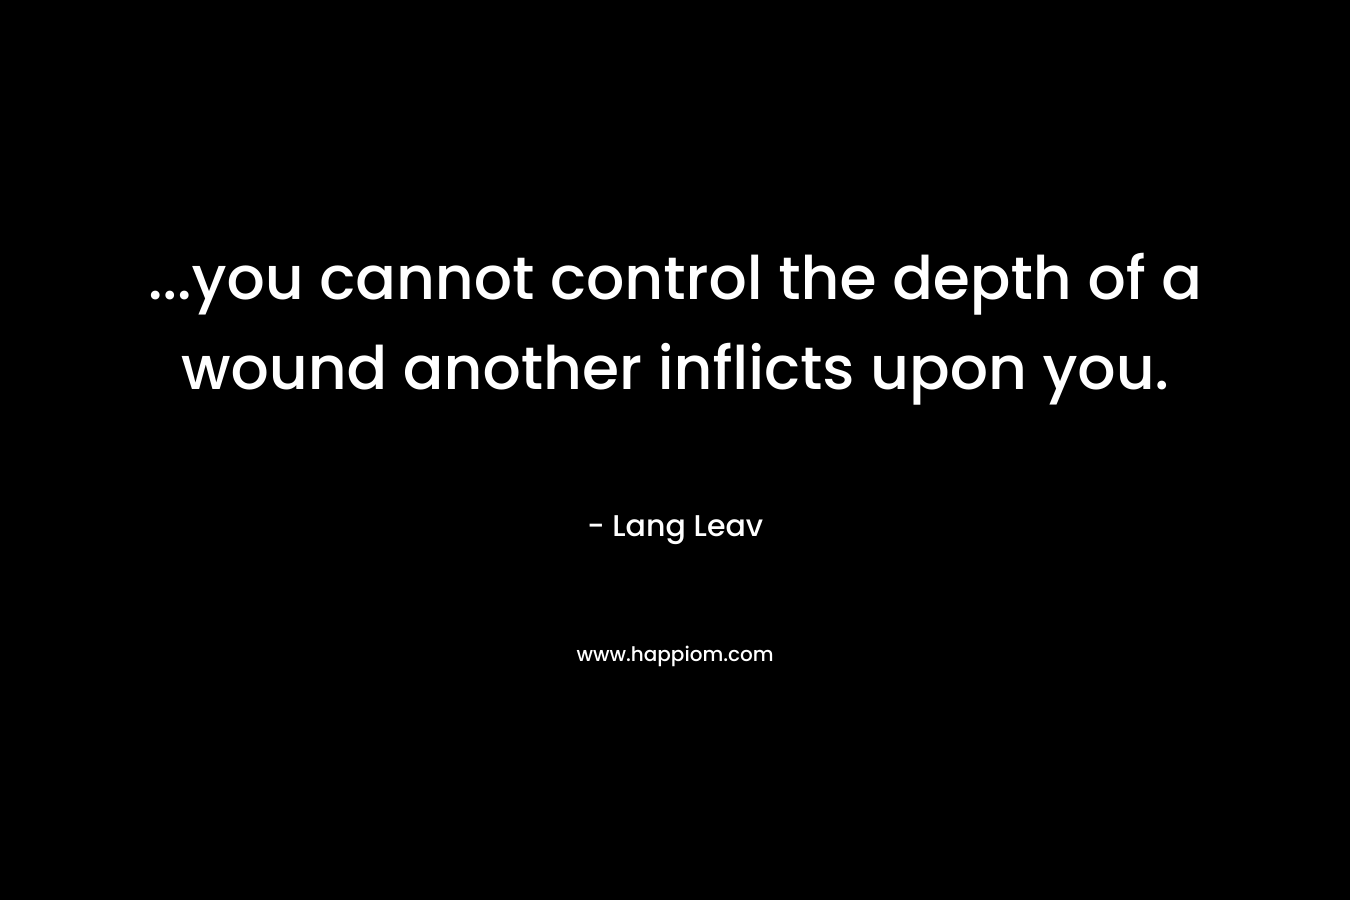 …you cannot control the depth of a wound another inflicts upon you. – Lang Leav